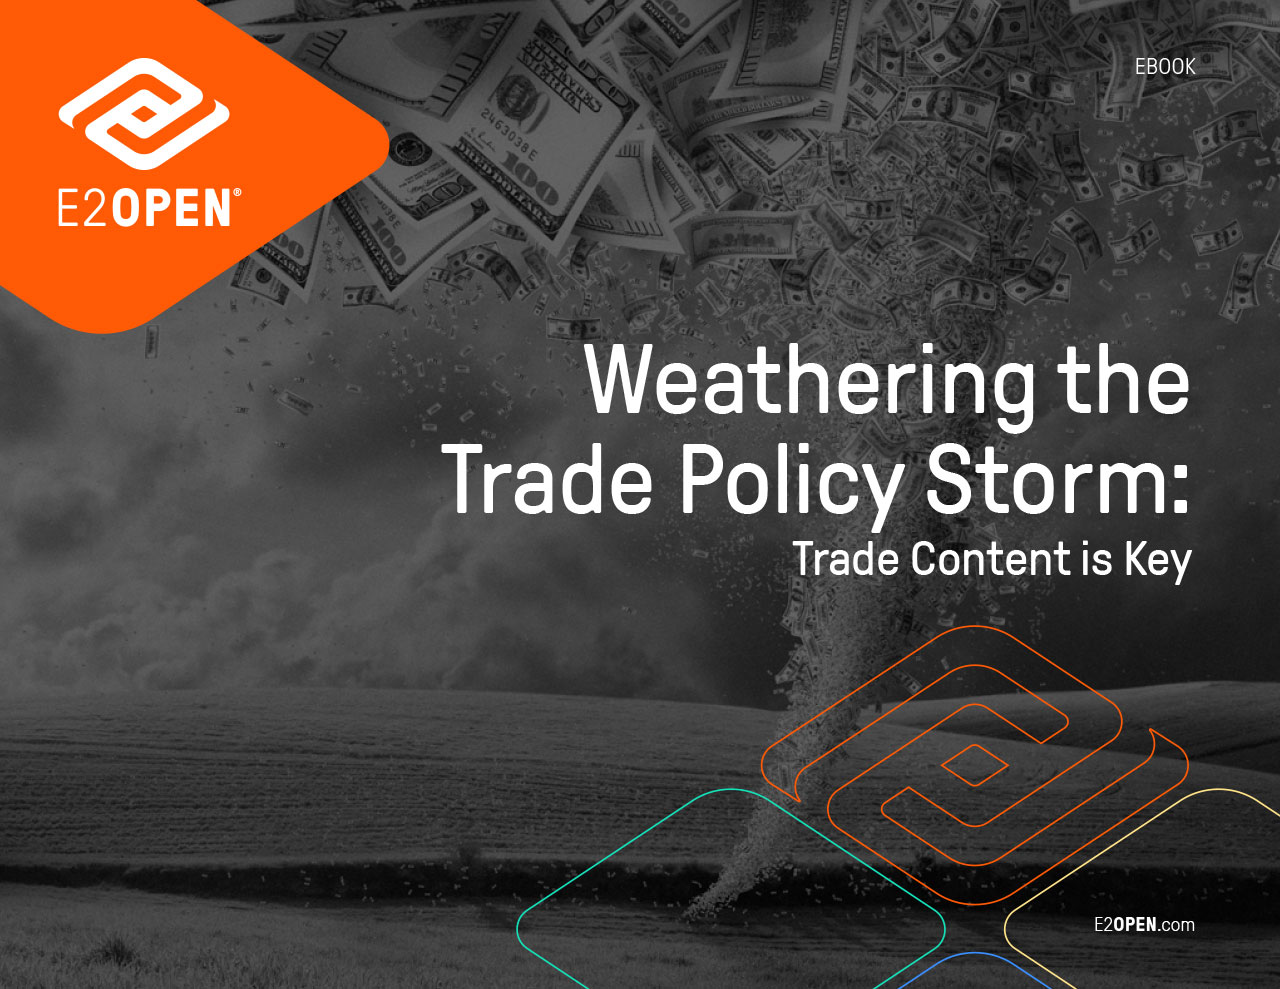 Weathering the Trade Policy Storm eBook